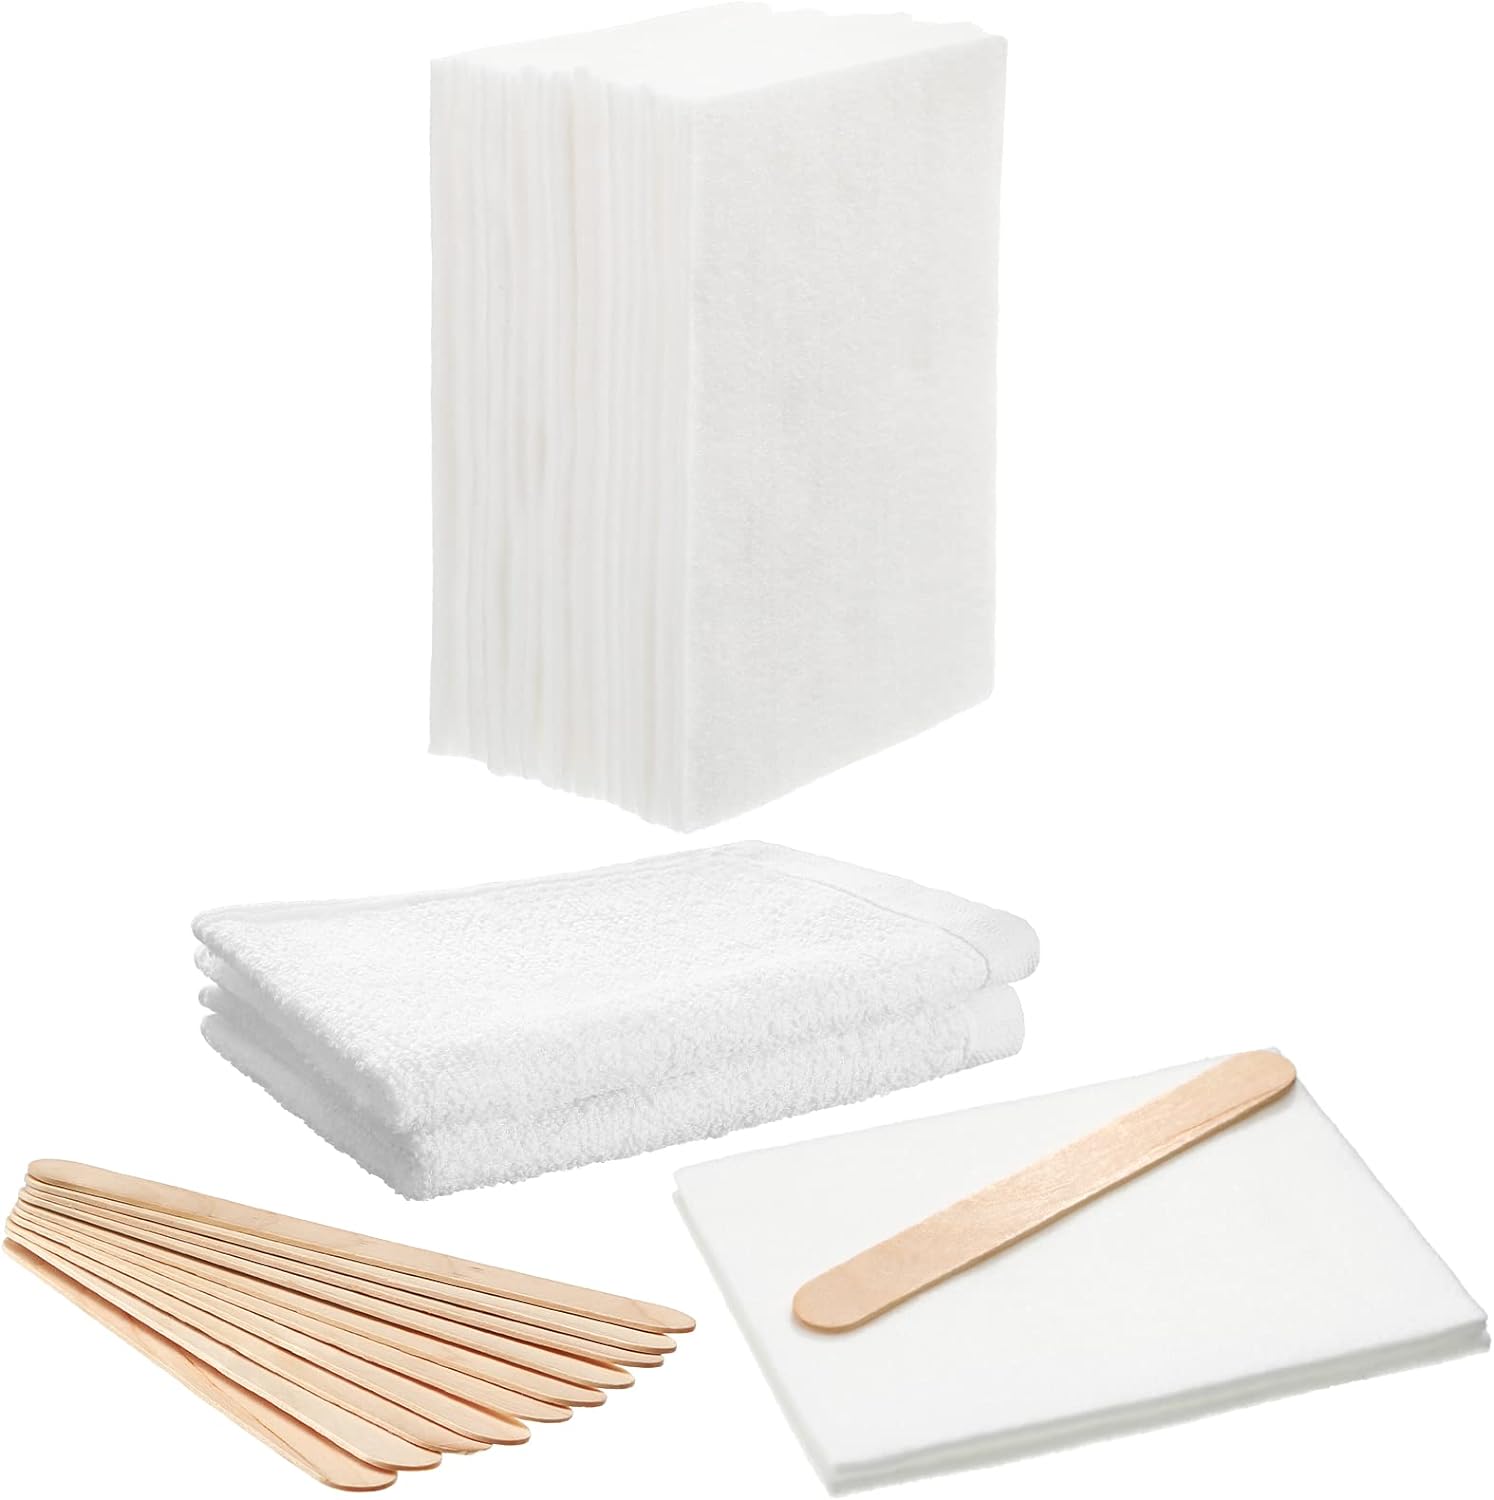 27 Pieces Wood Wax Applicator, Includes 15 White Non-Woven Pads 2 Terry Cloth Buffing Towels and 10 Stirring Sticks for Polishing Cutting Board and Multi Purpose Use in Home